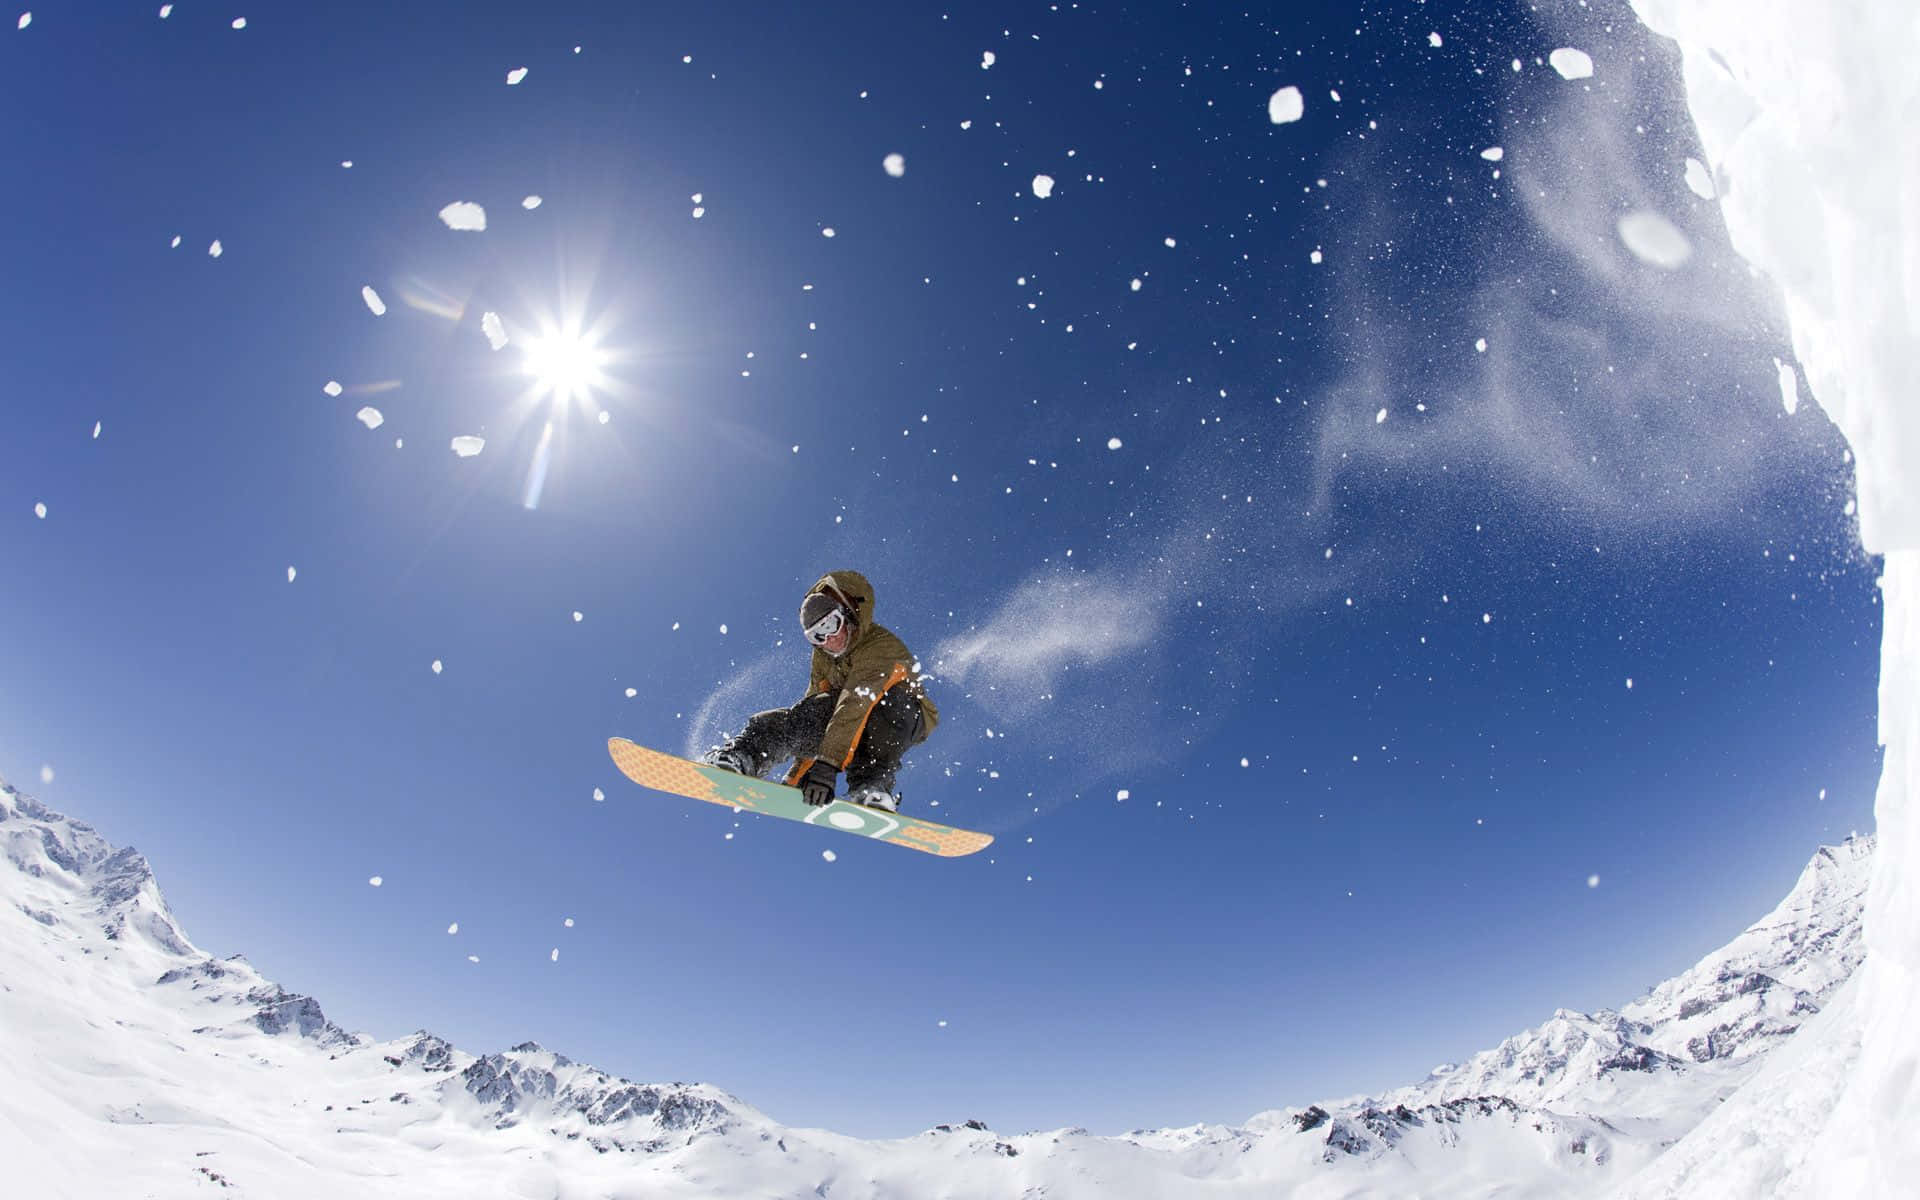 A Skier In Motion On A Pristine Snowy Slope Wallpaper